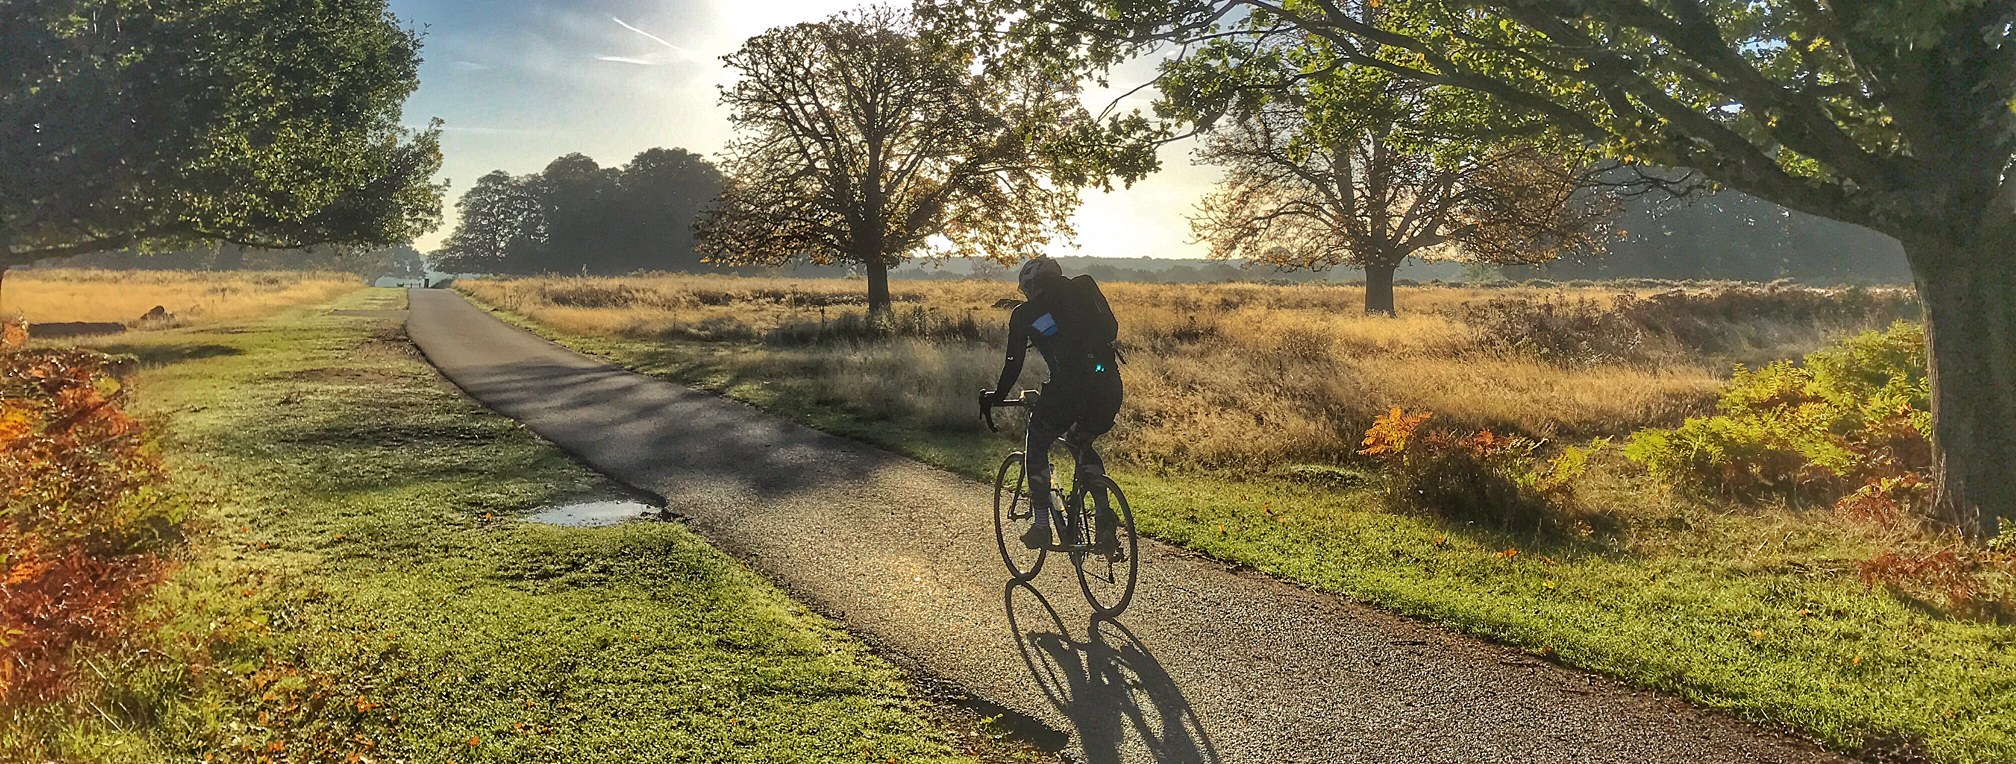 Cycling in Richmond Park, Andrew Wilson